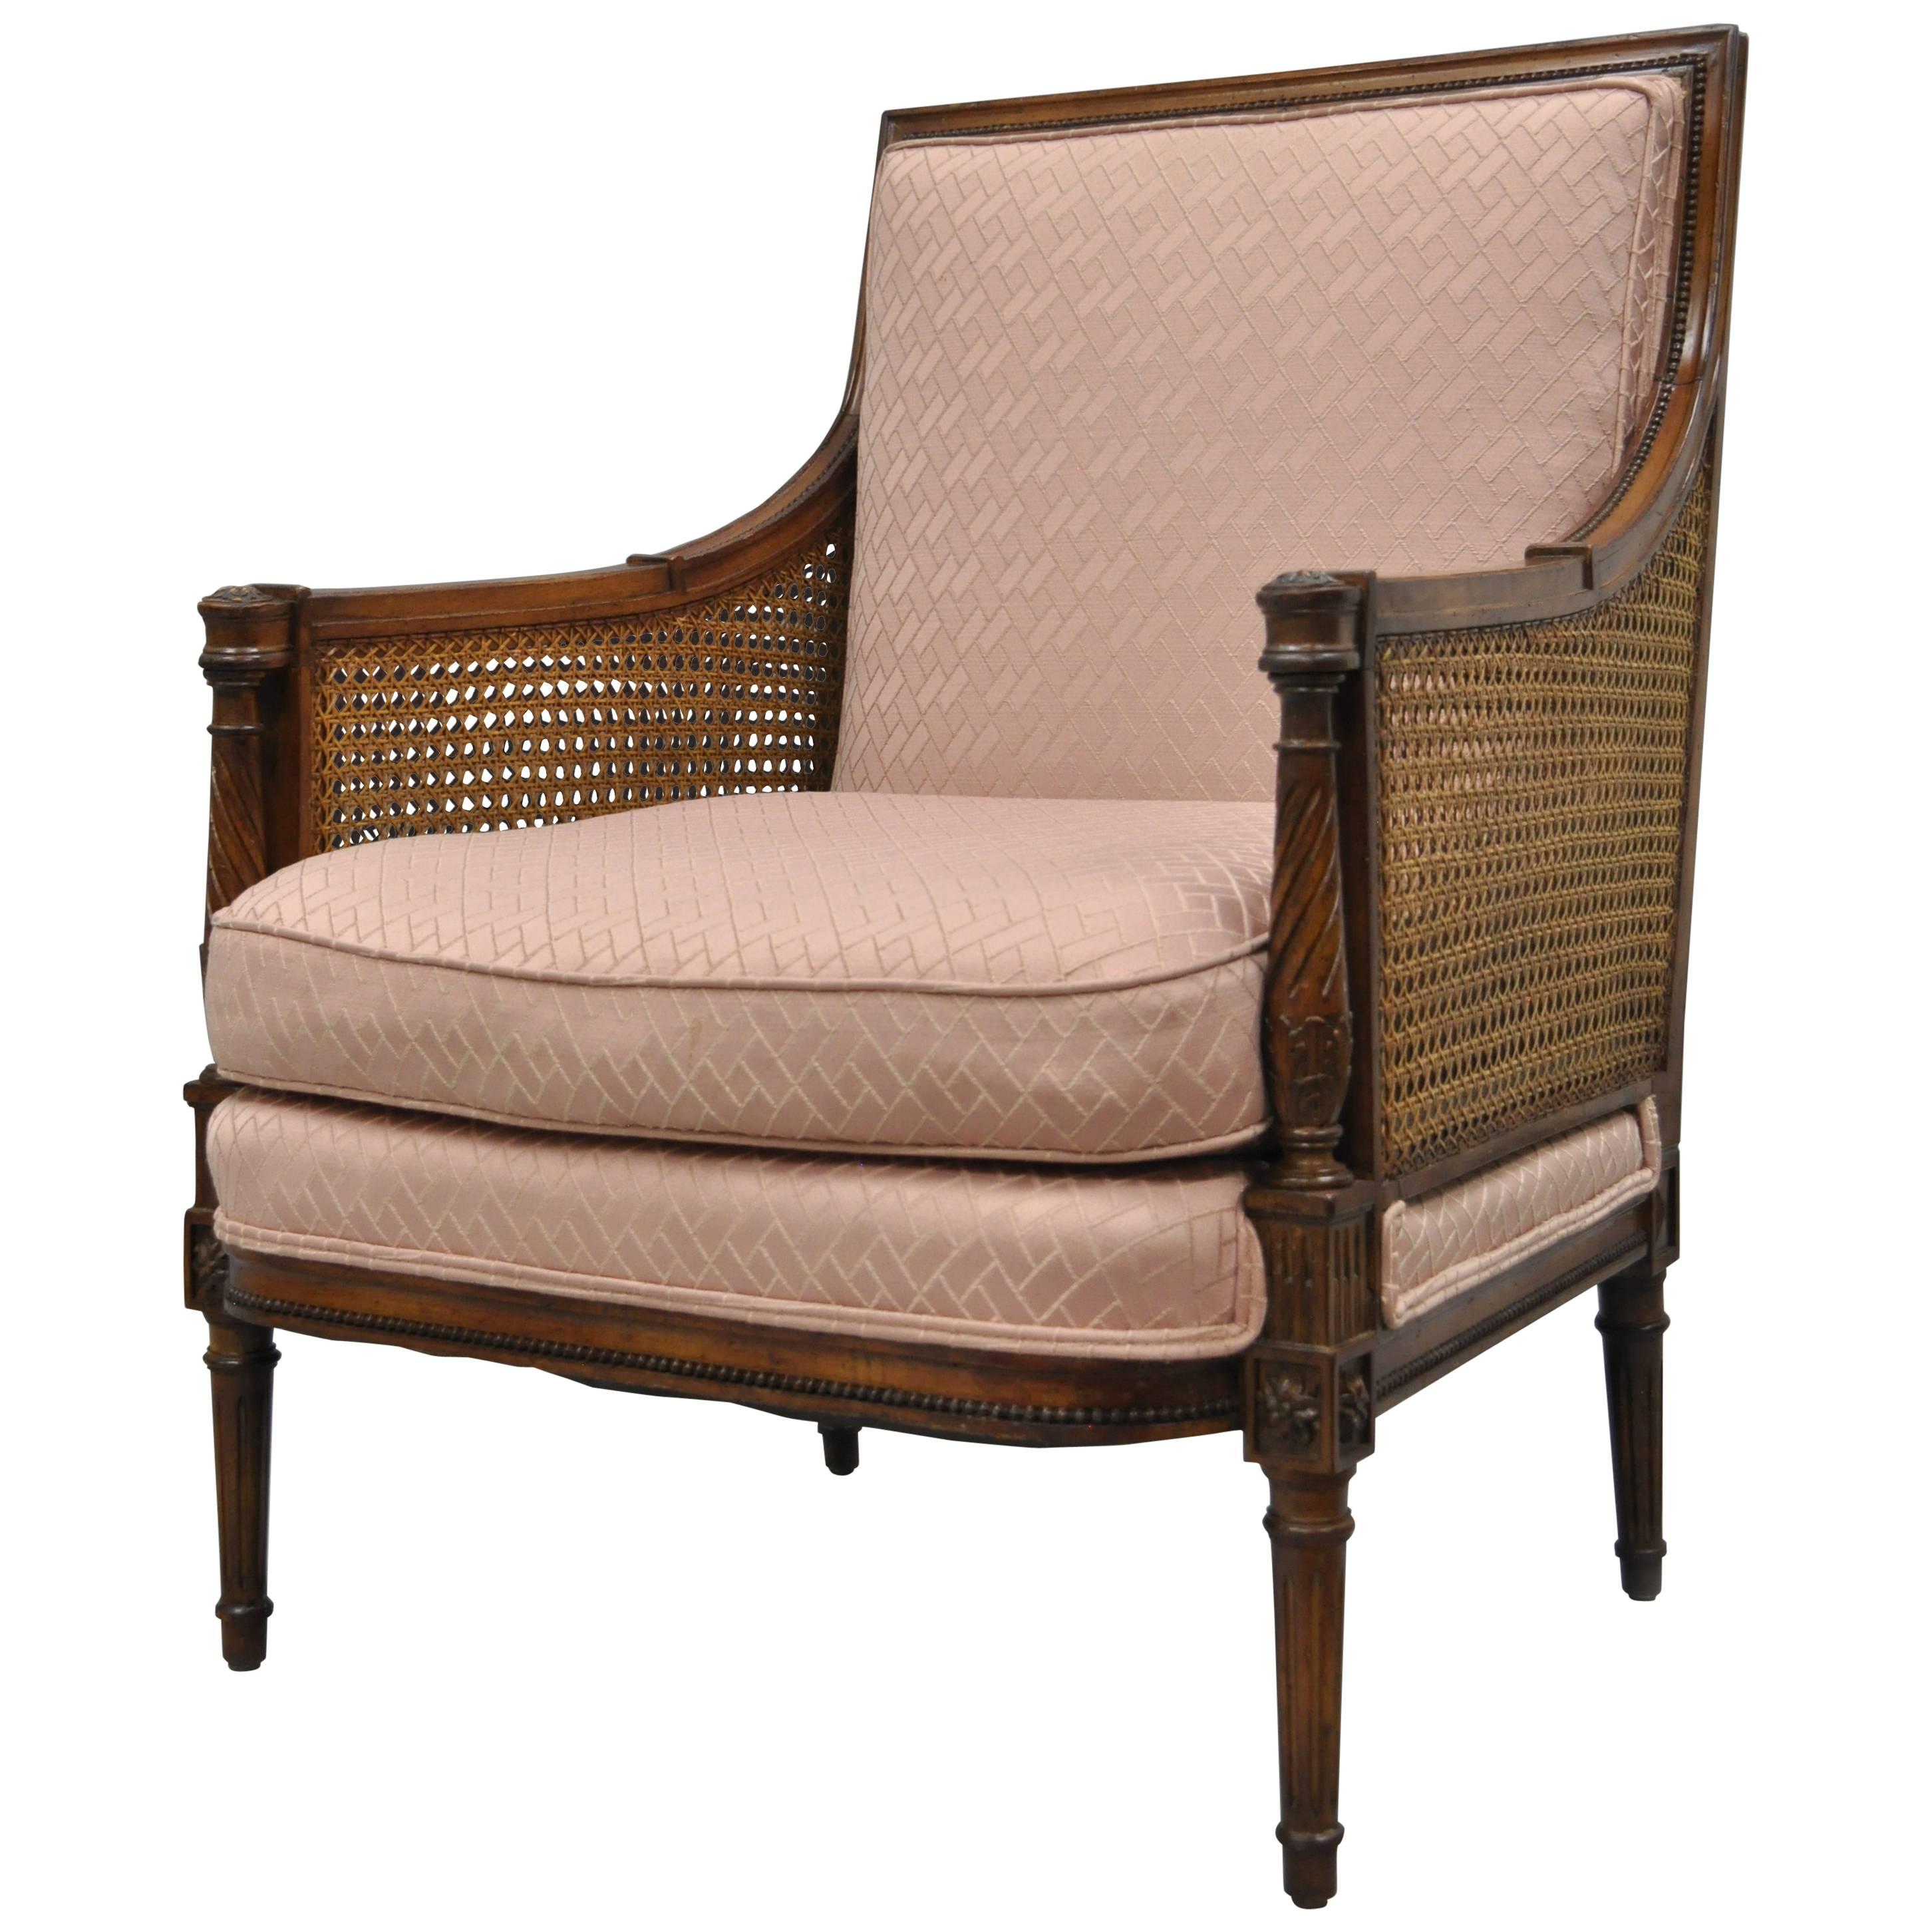 French Louis XVI Directoire Style Cane Bergere Arm Chair Carved Walnut Frame